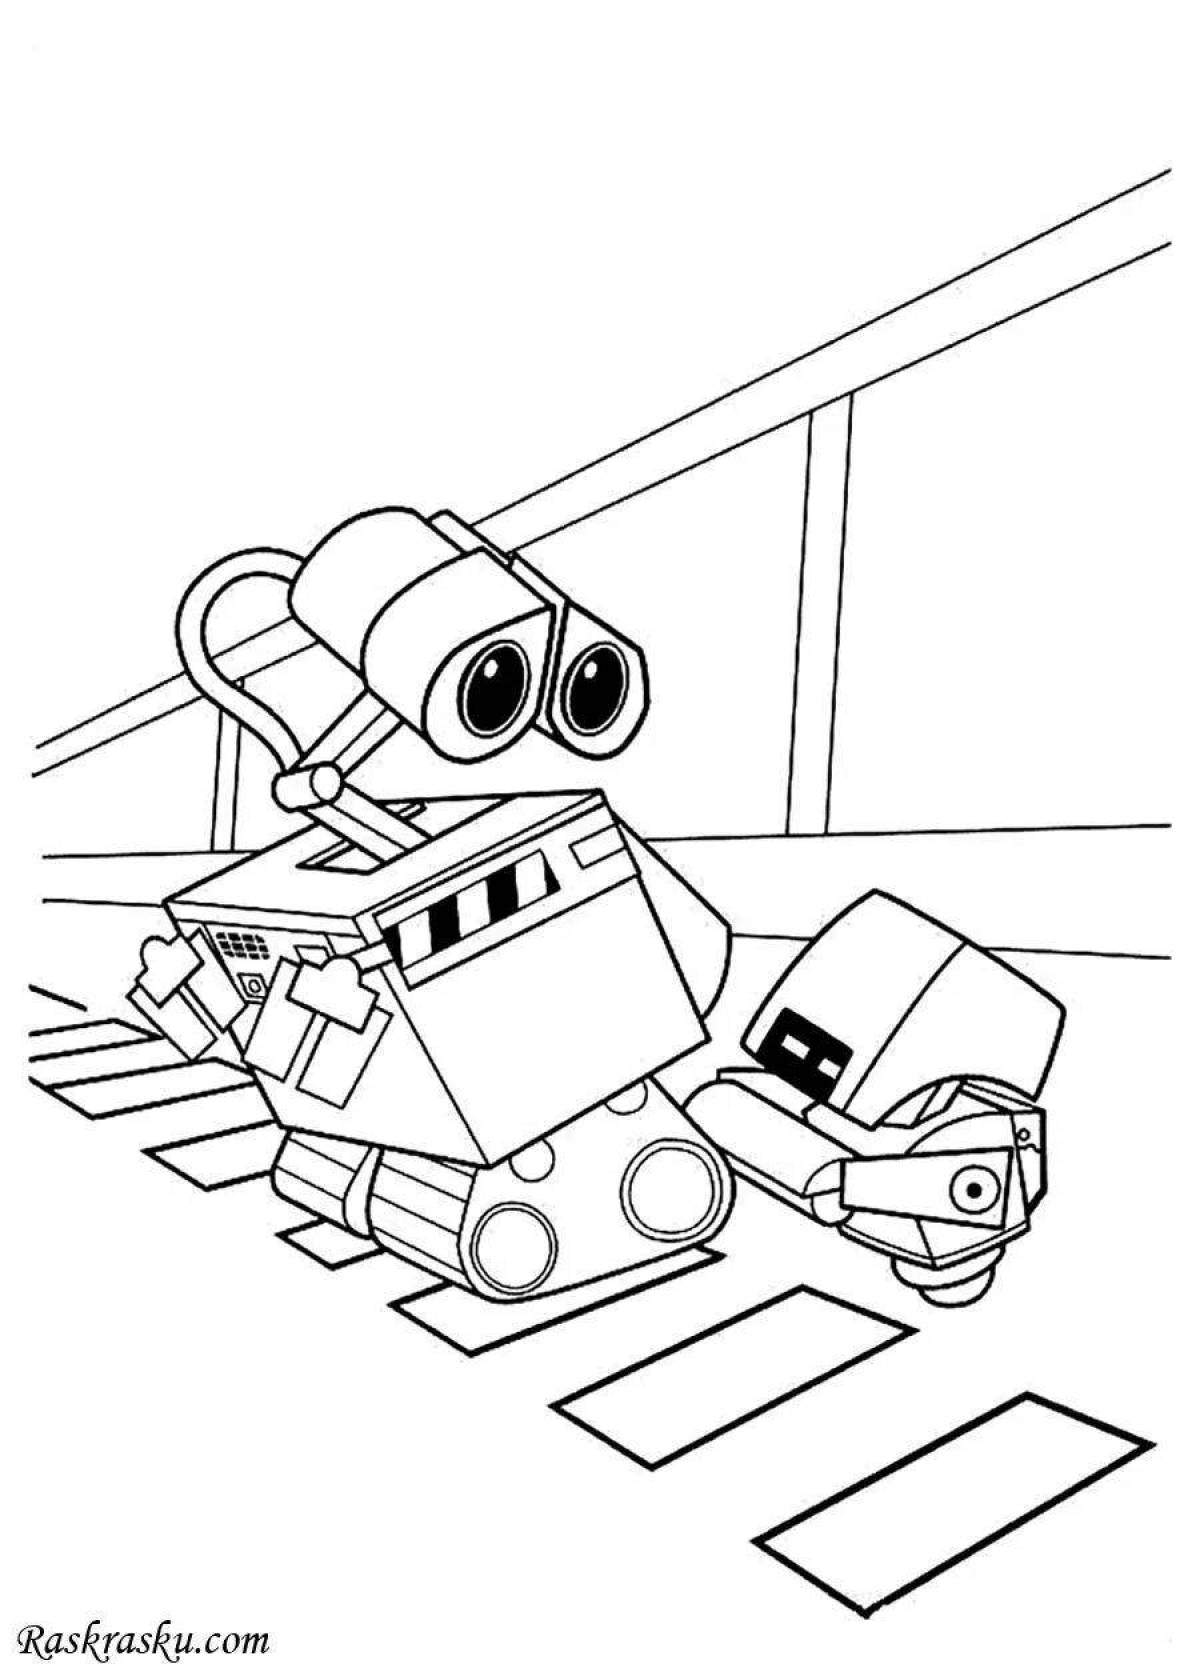 Valley of robots exciting coloring book